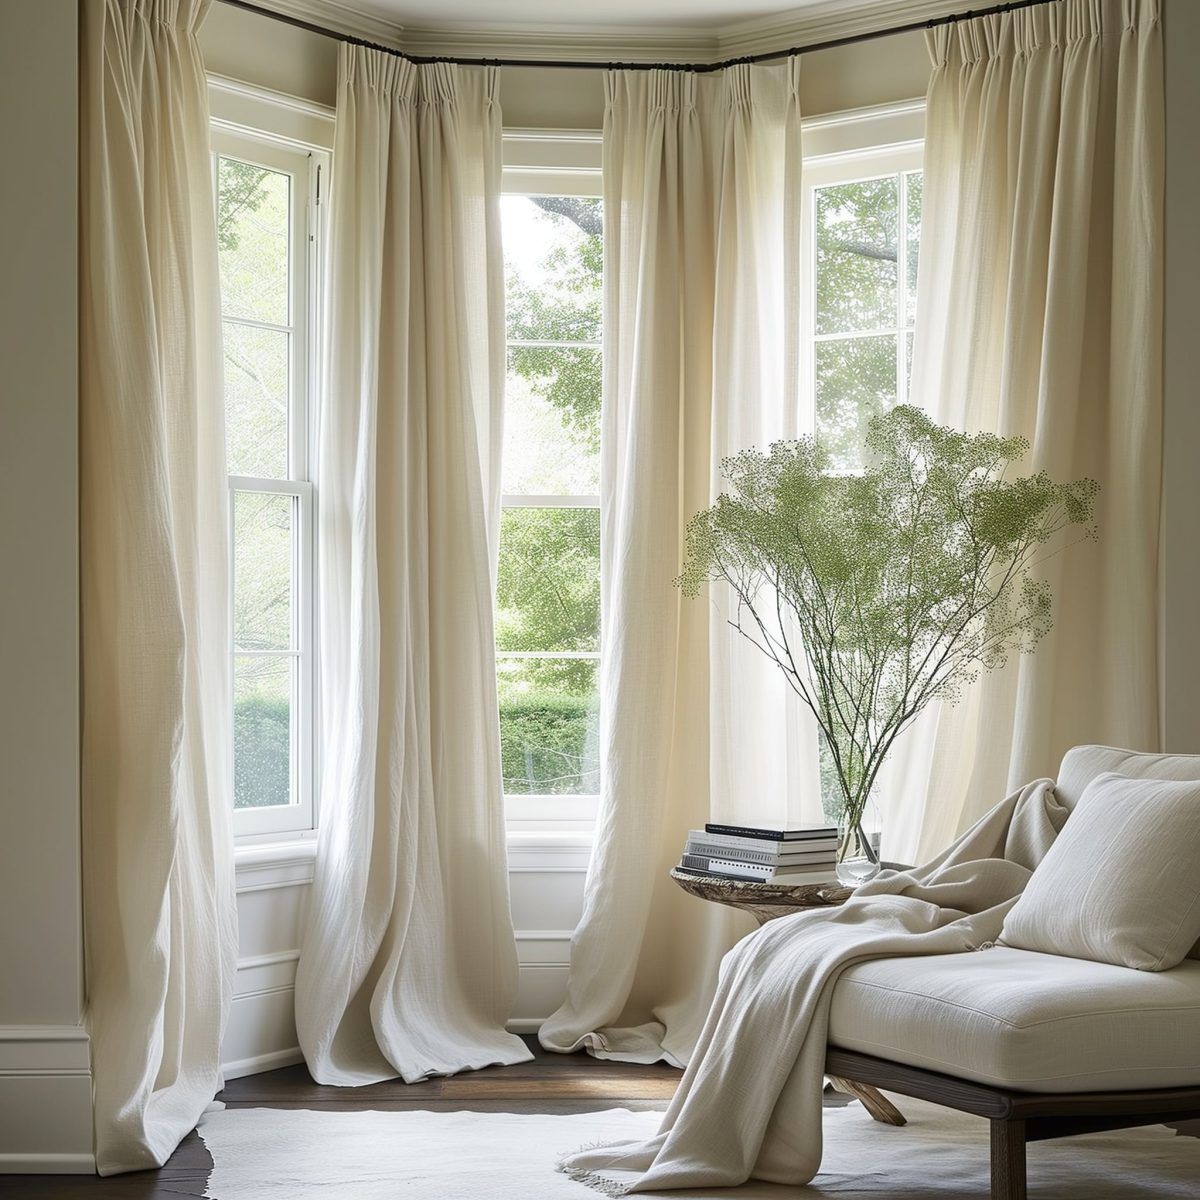 Stylish Solutions: How to Dress Up Your Living Room with Bay Window Treatments